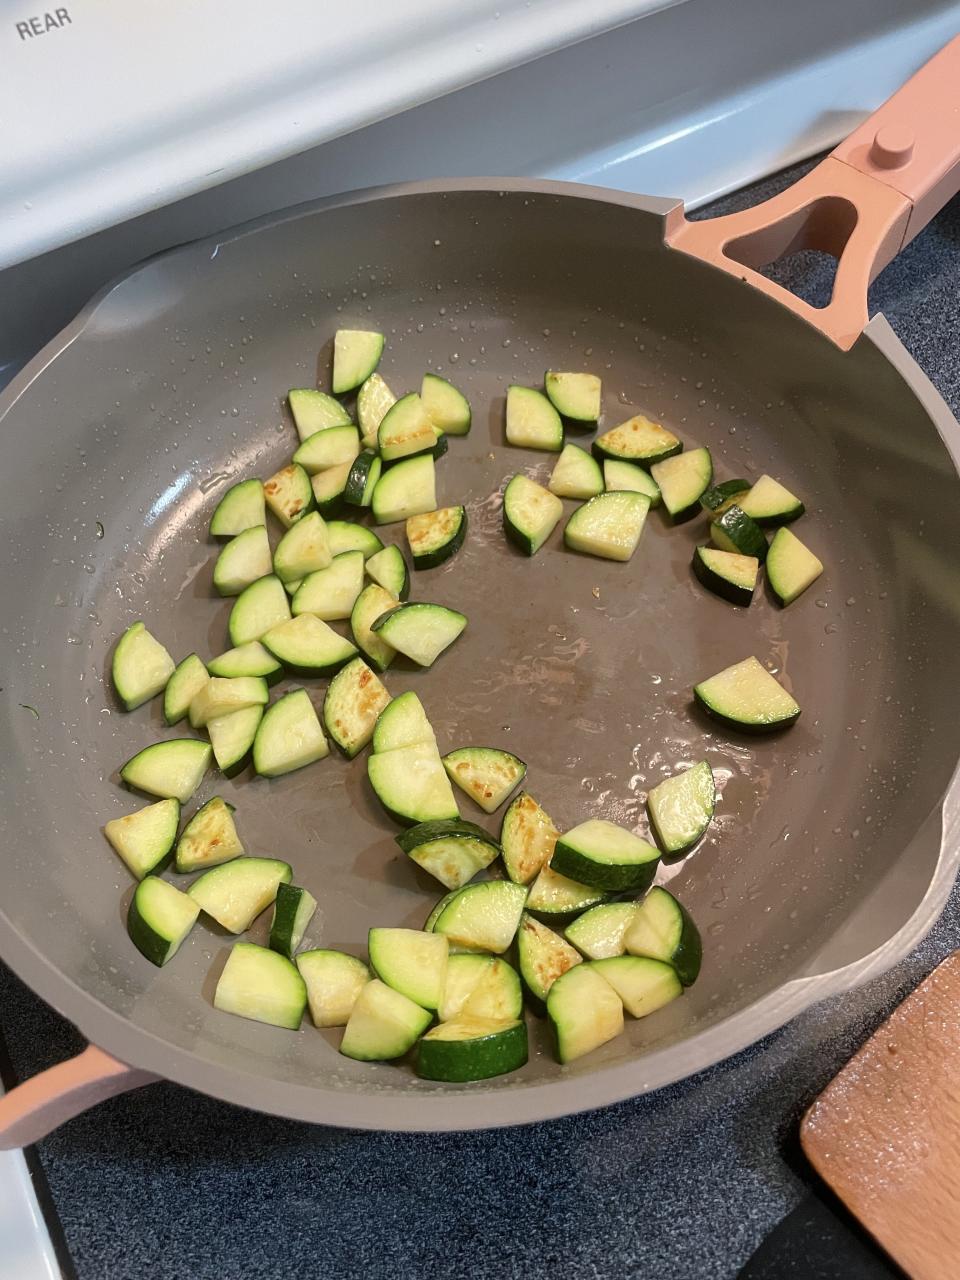 Zucchini squash wedges cooking in the pan